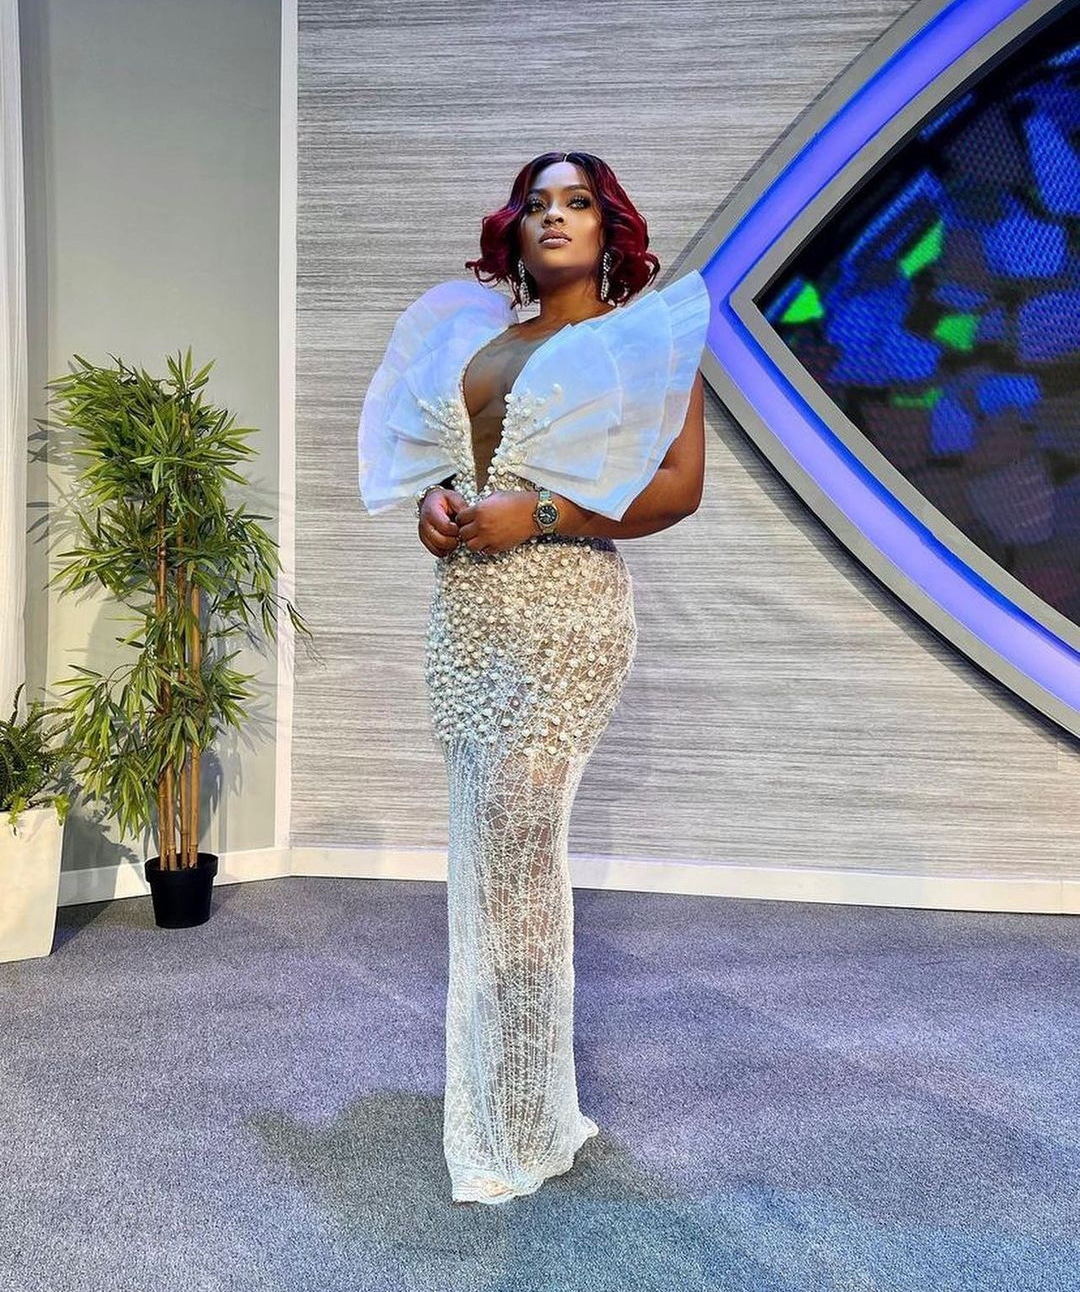 Online Users React To BBN, Khloe As She Publicly Displays Her